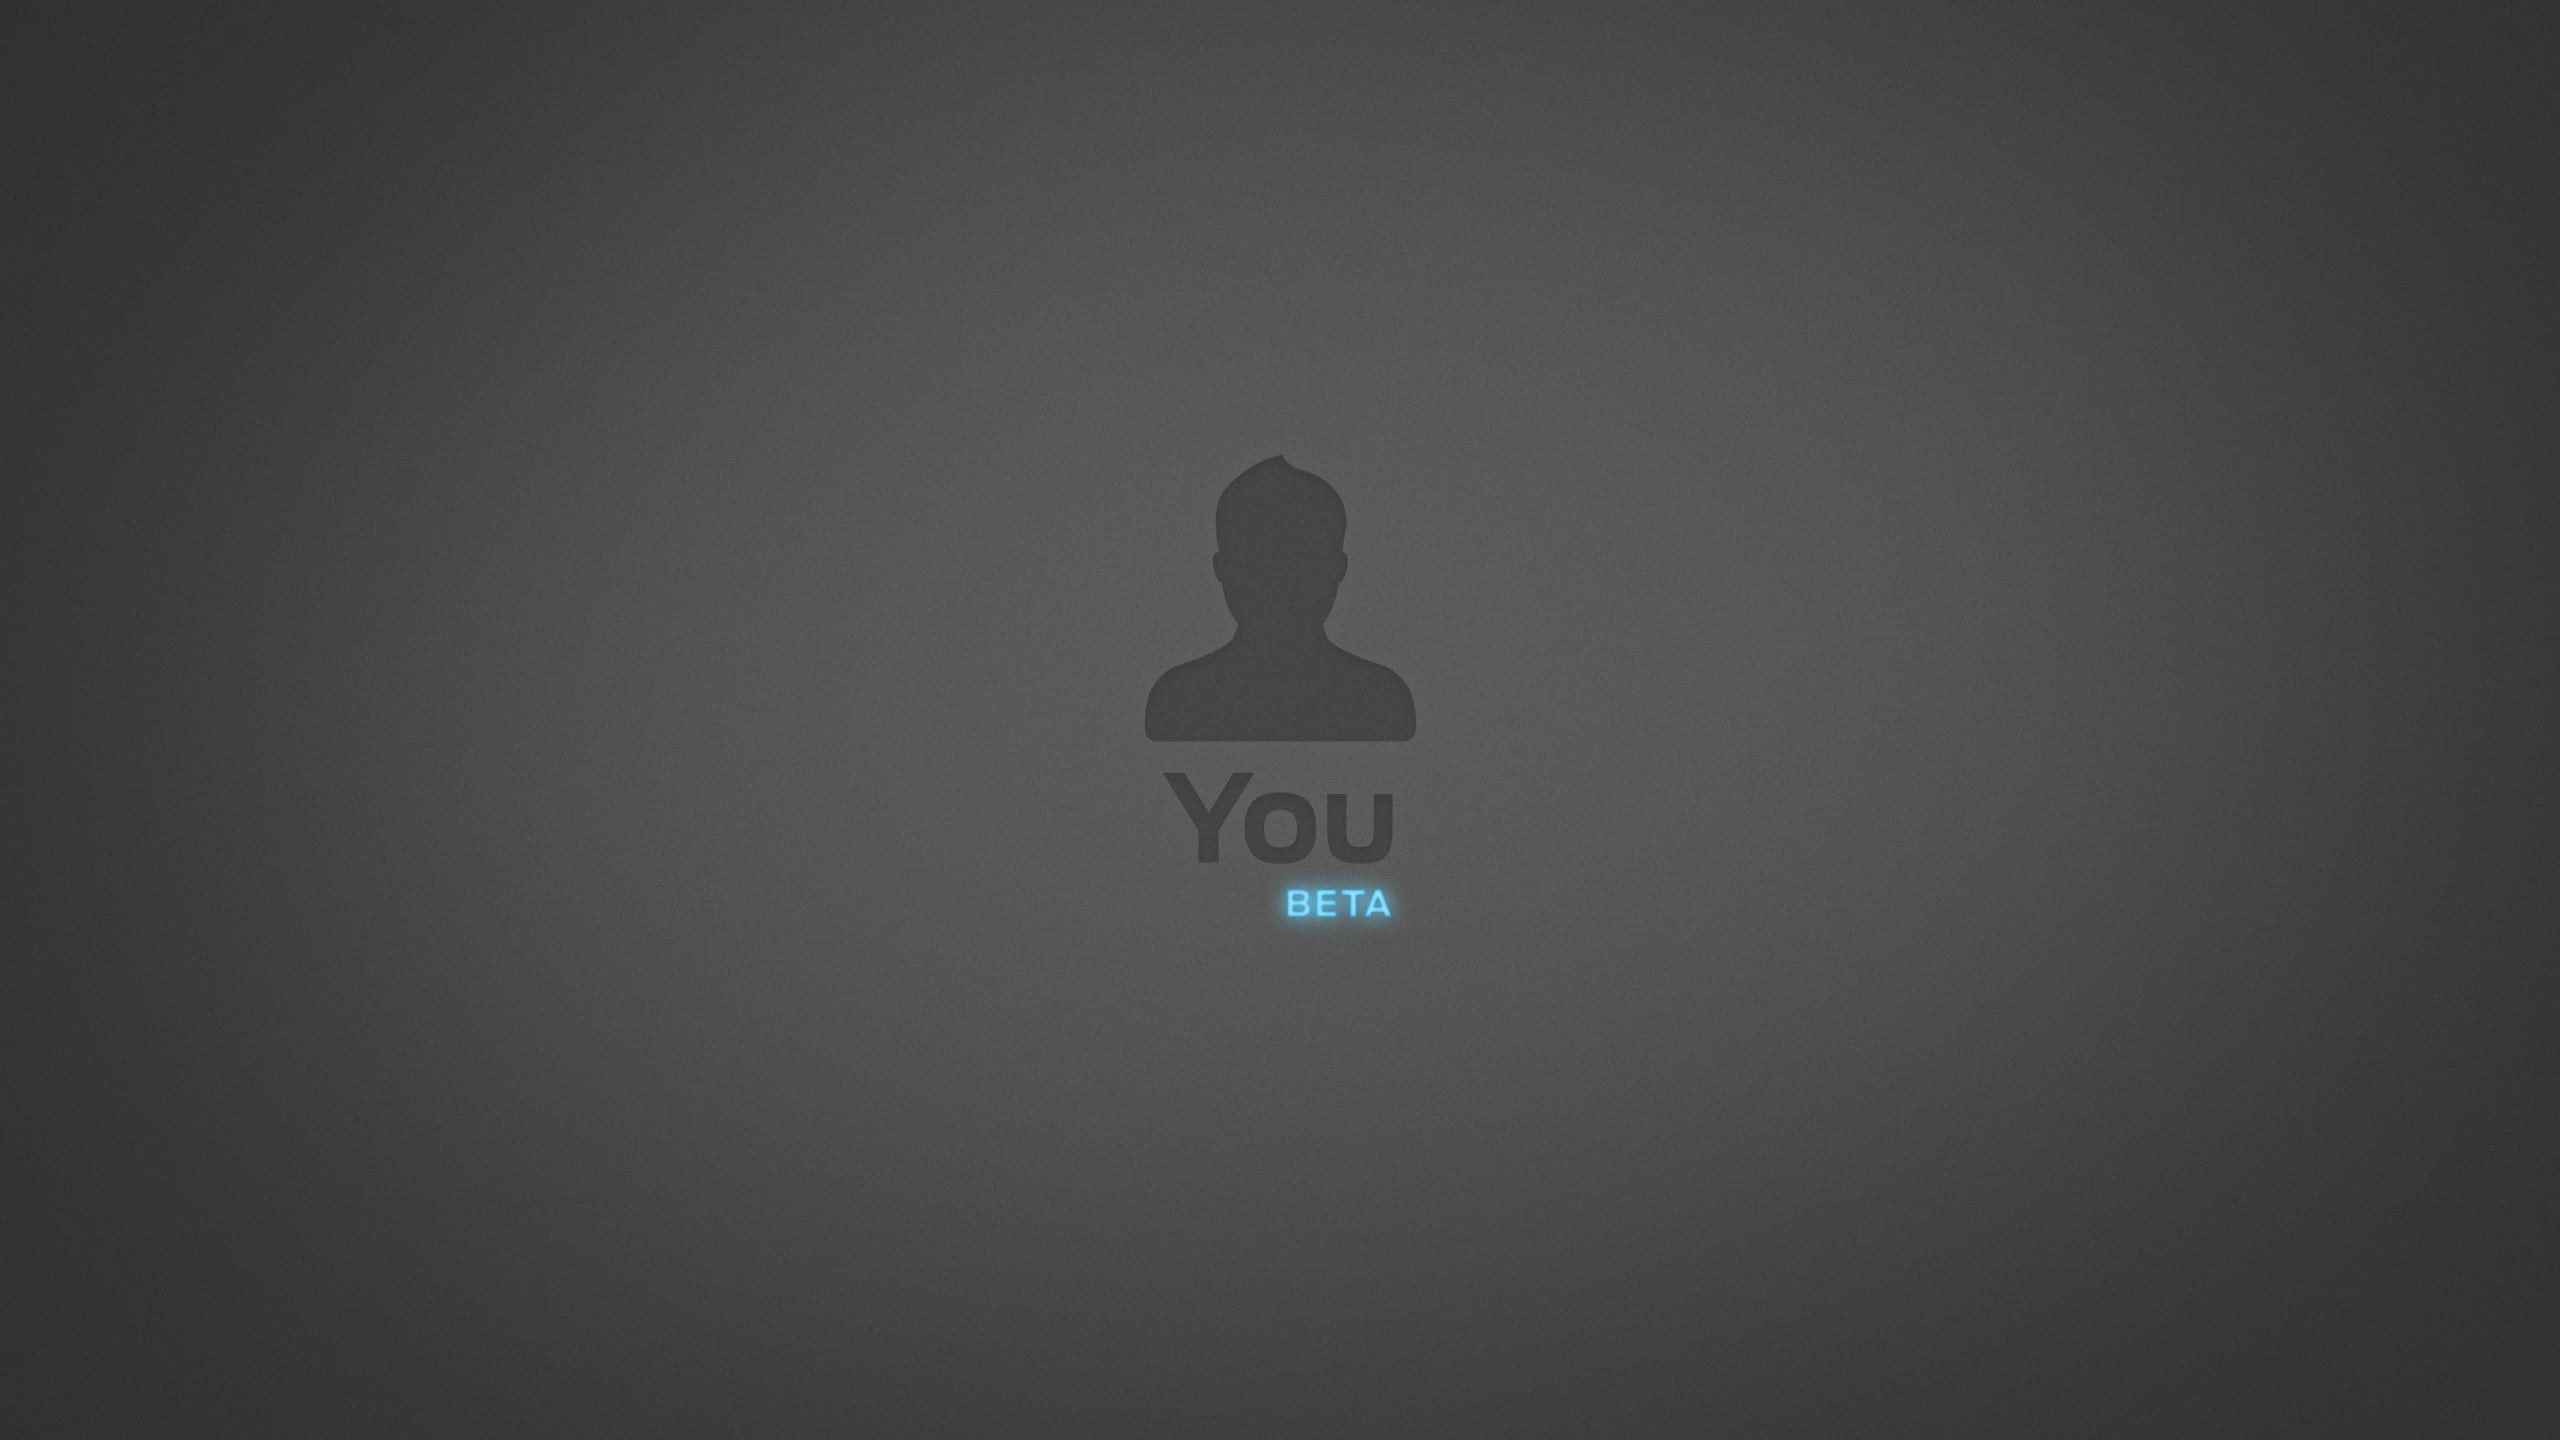 you beta text overlay, minimalism, gray background, simple background